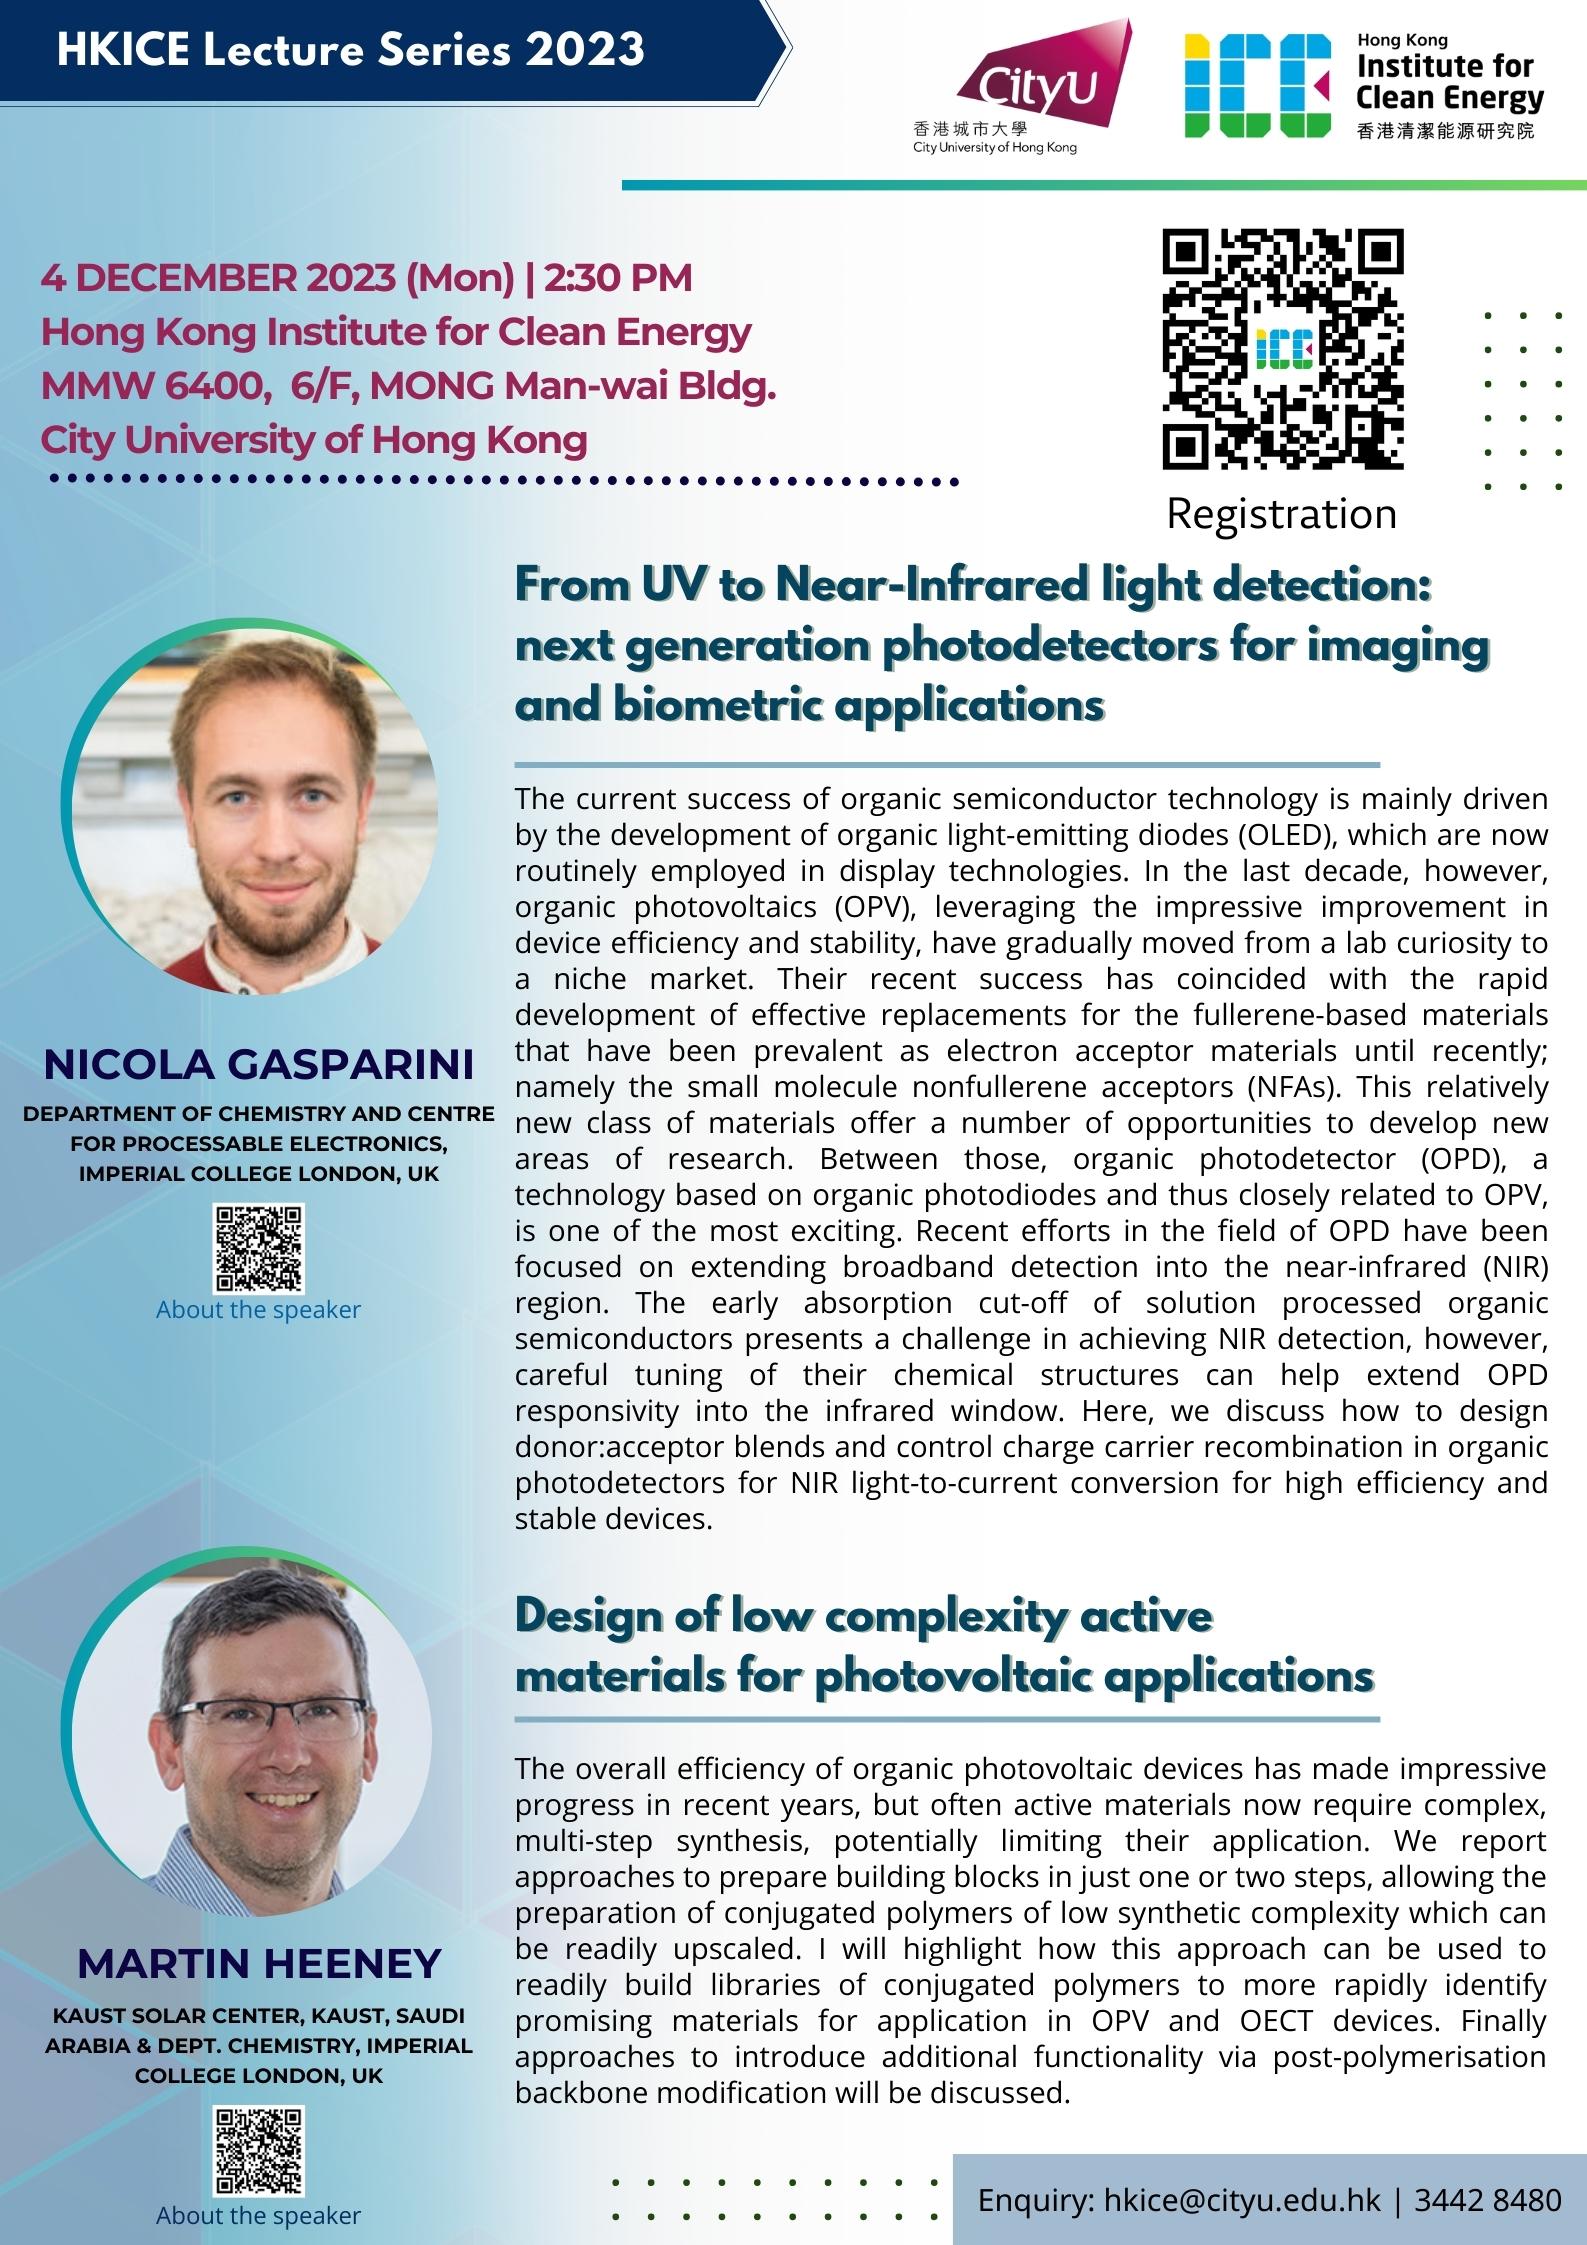 HKICE Lecture Series by Dr. Nicola Gasparini and Prof. Martin Heeney (4 December 2023)